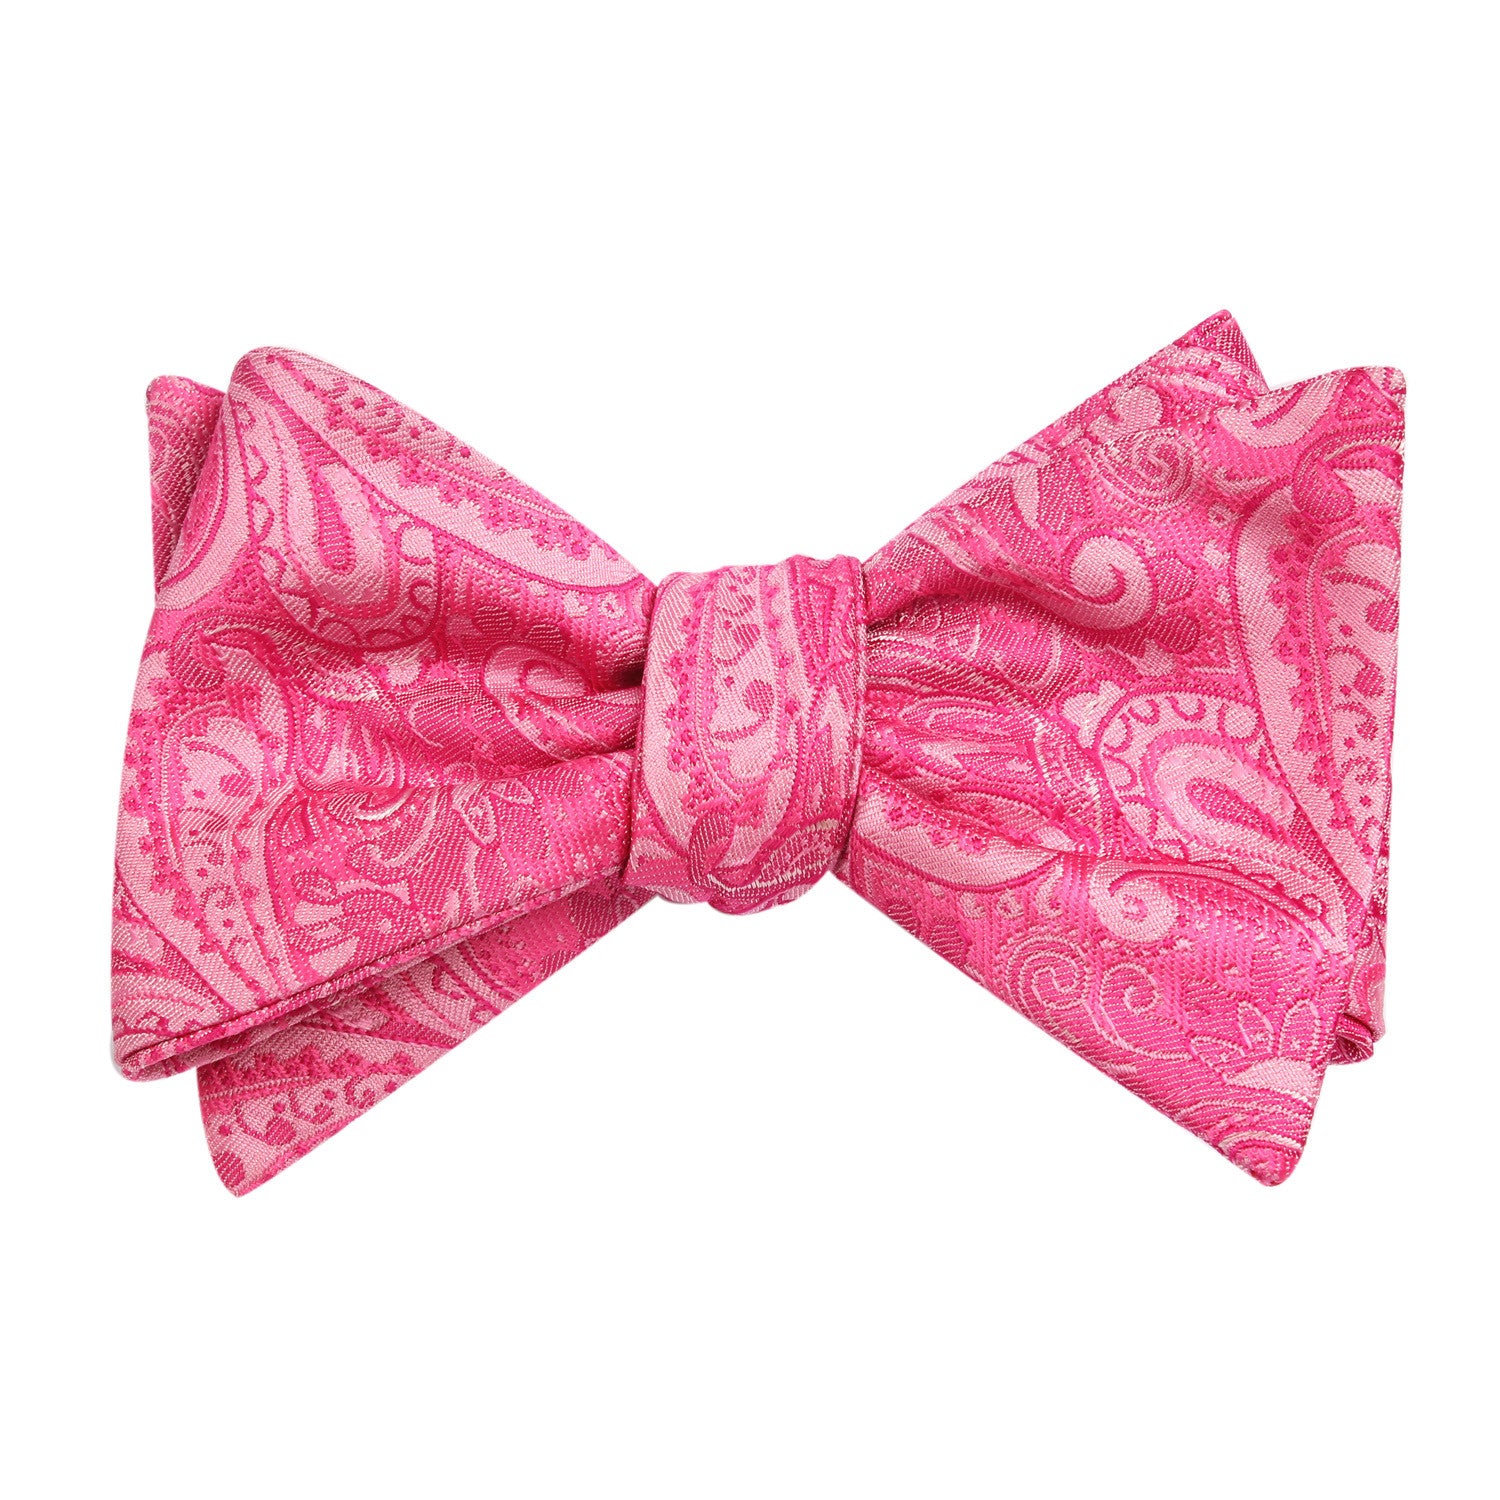 Paisley Pink - Bow Tie (Untied) Self tied knot by OTAA